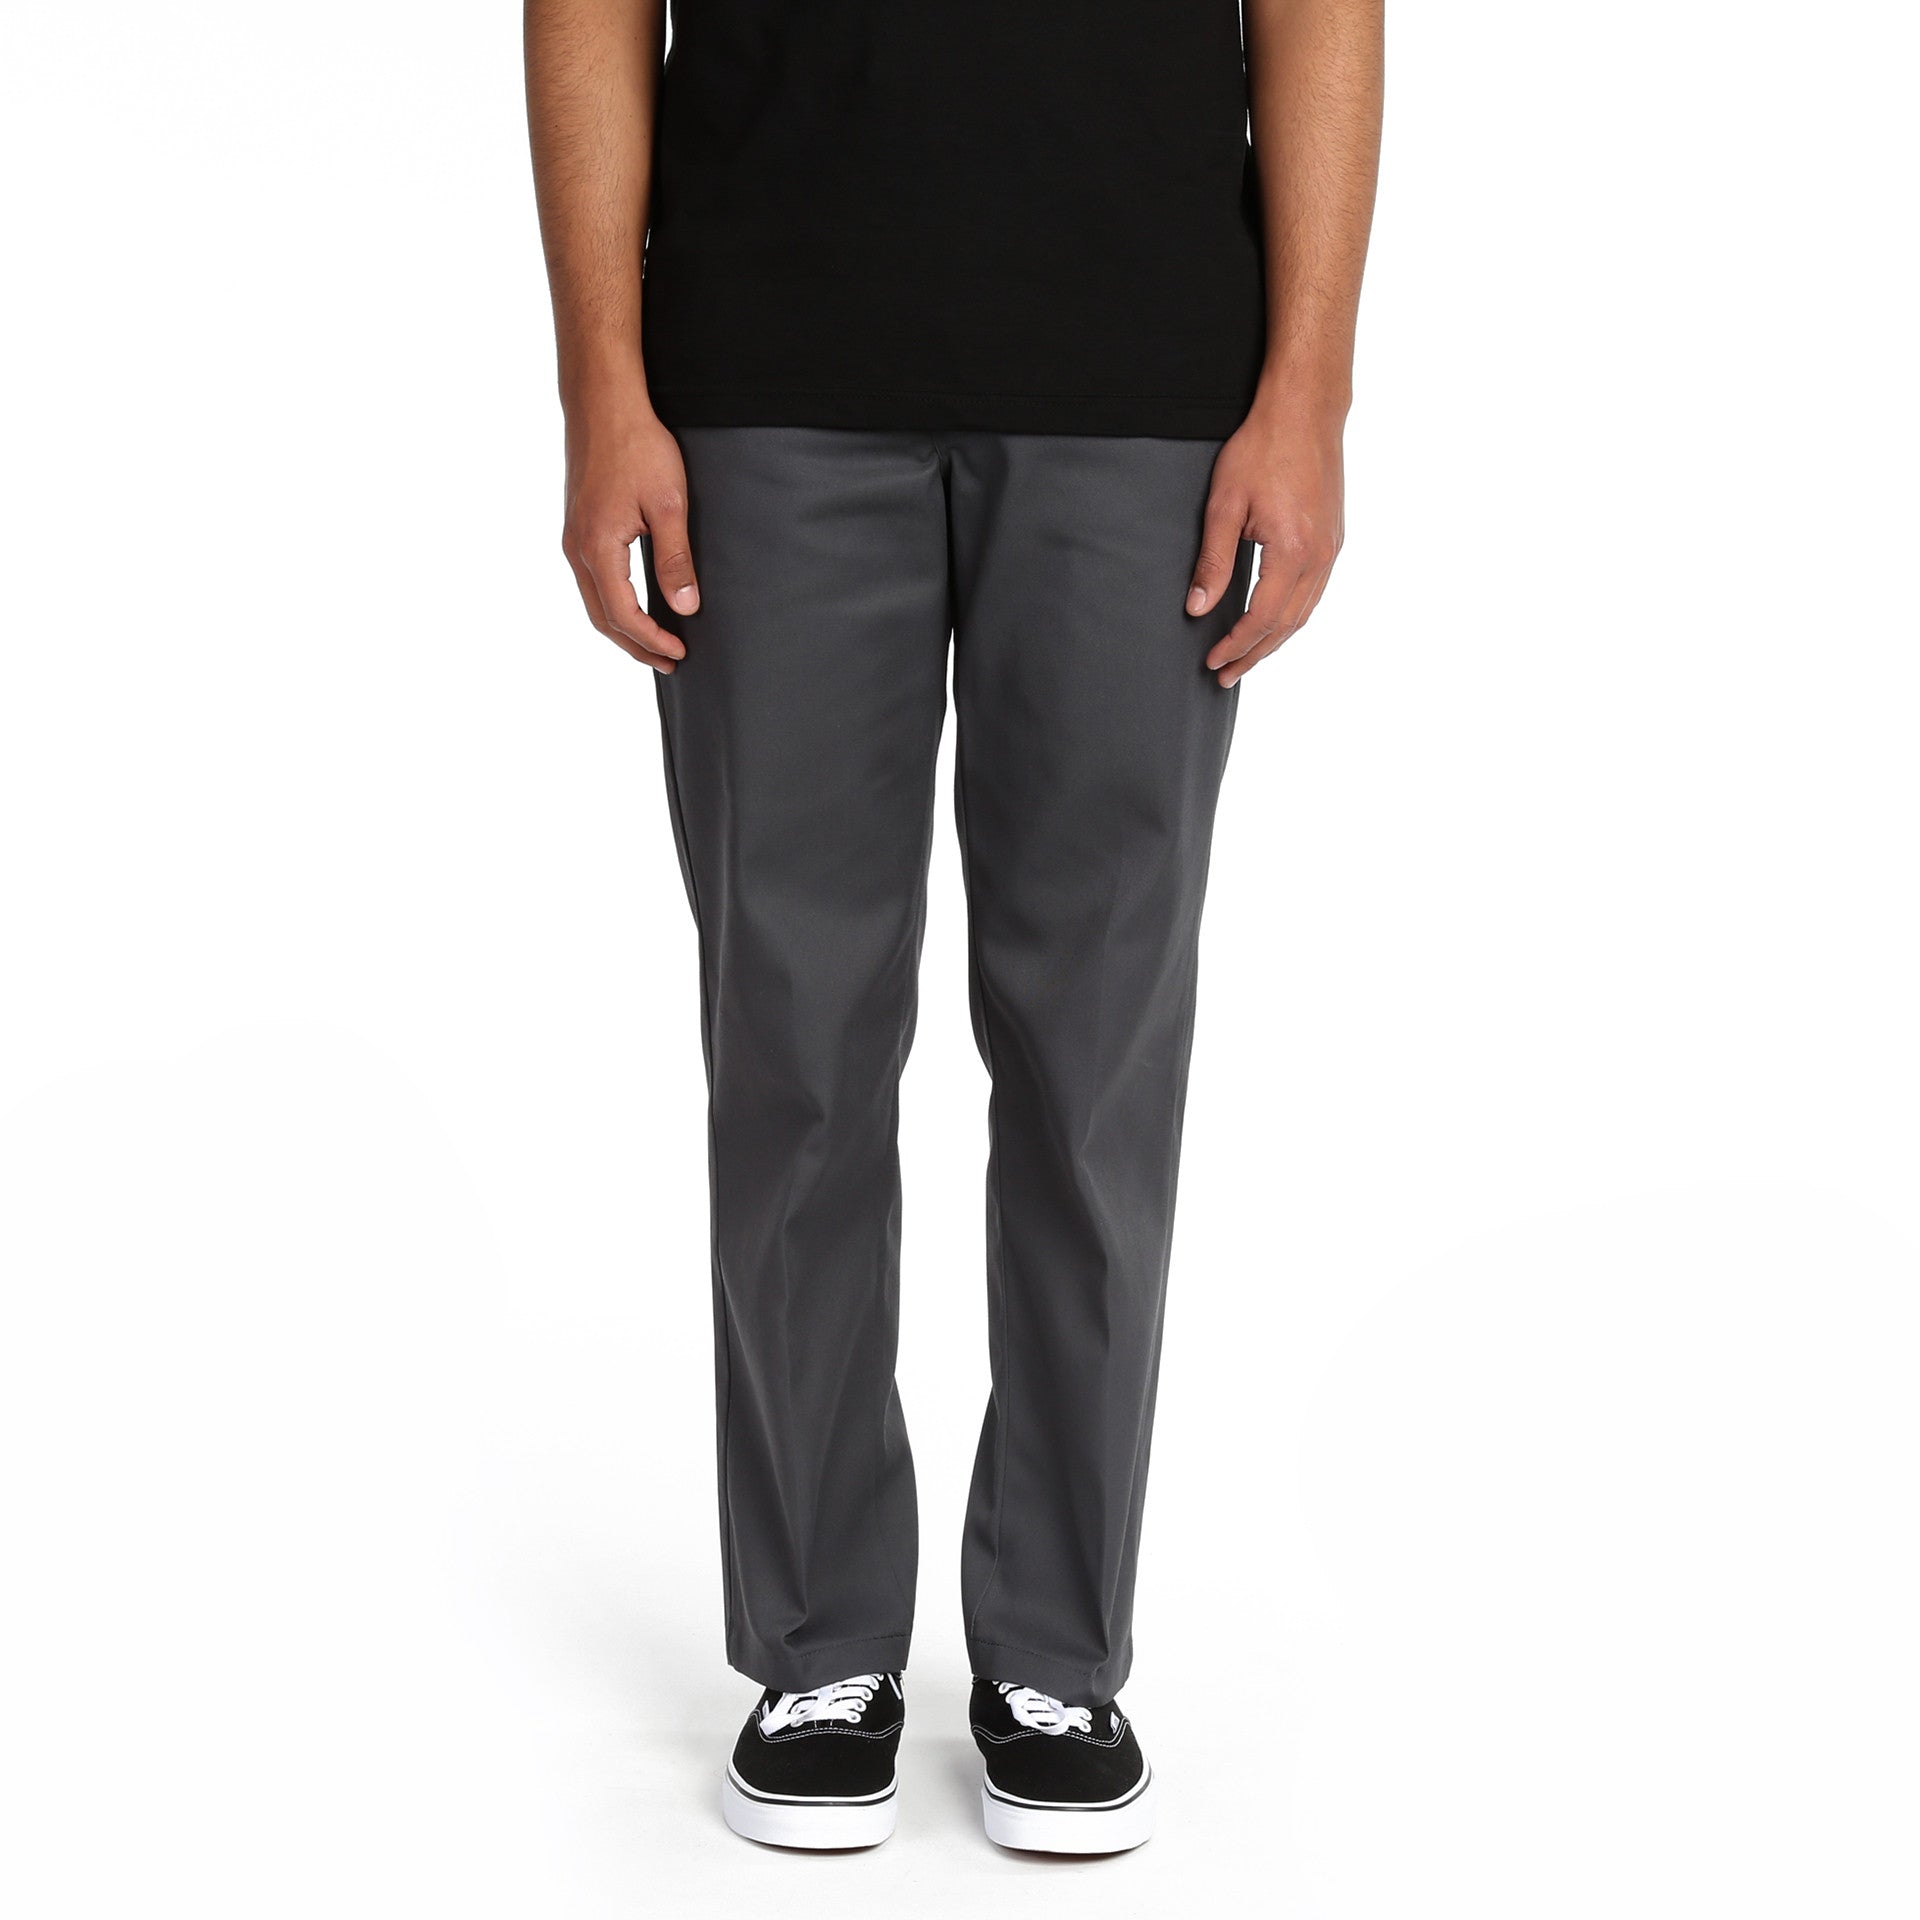 Slim Fit 873 Work Pant - Charcoal New Star